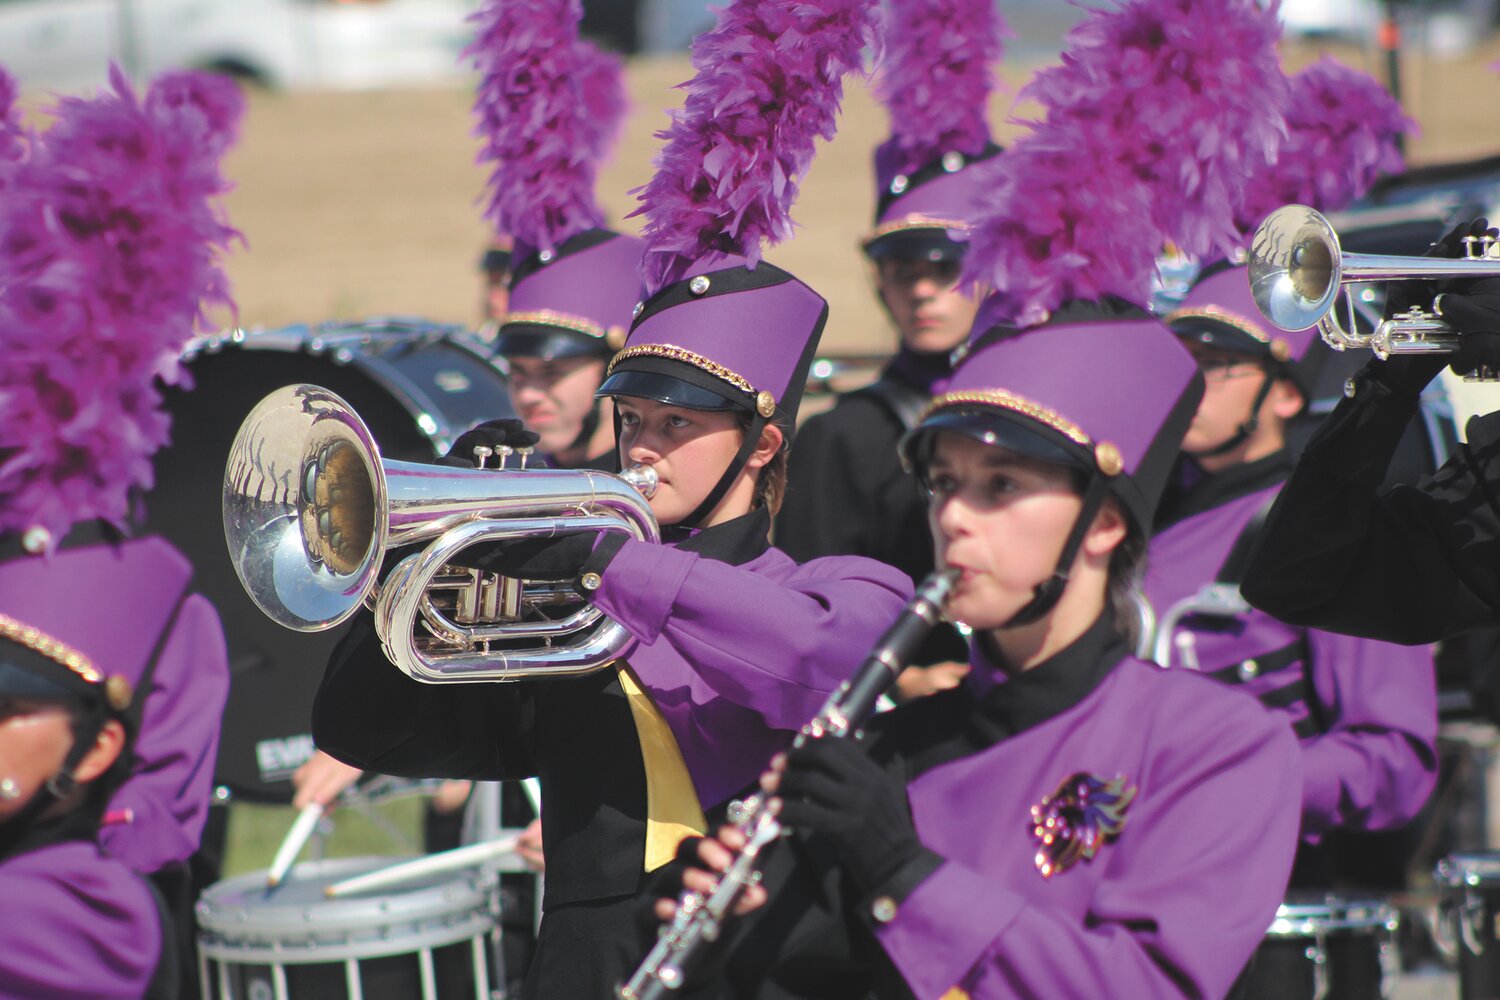 MCU placed 10th in the Indiana State Fair Band Day competition on Friday.